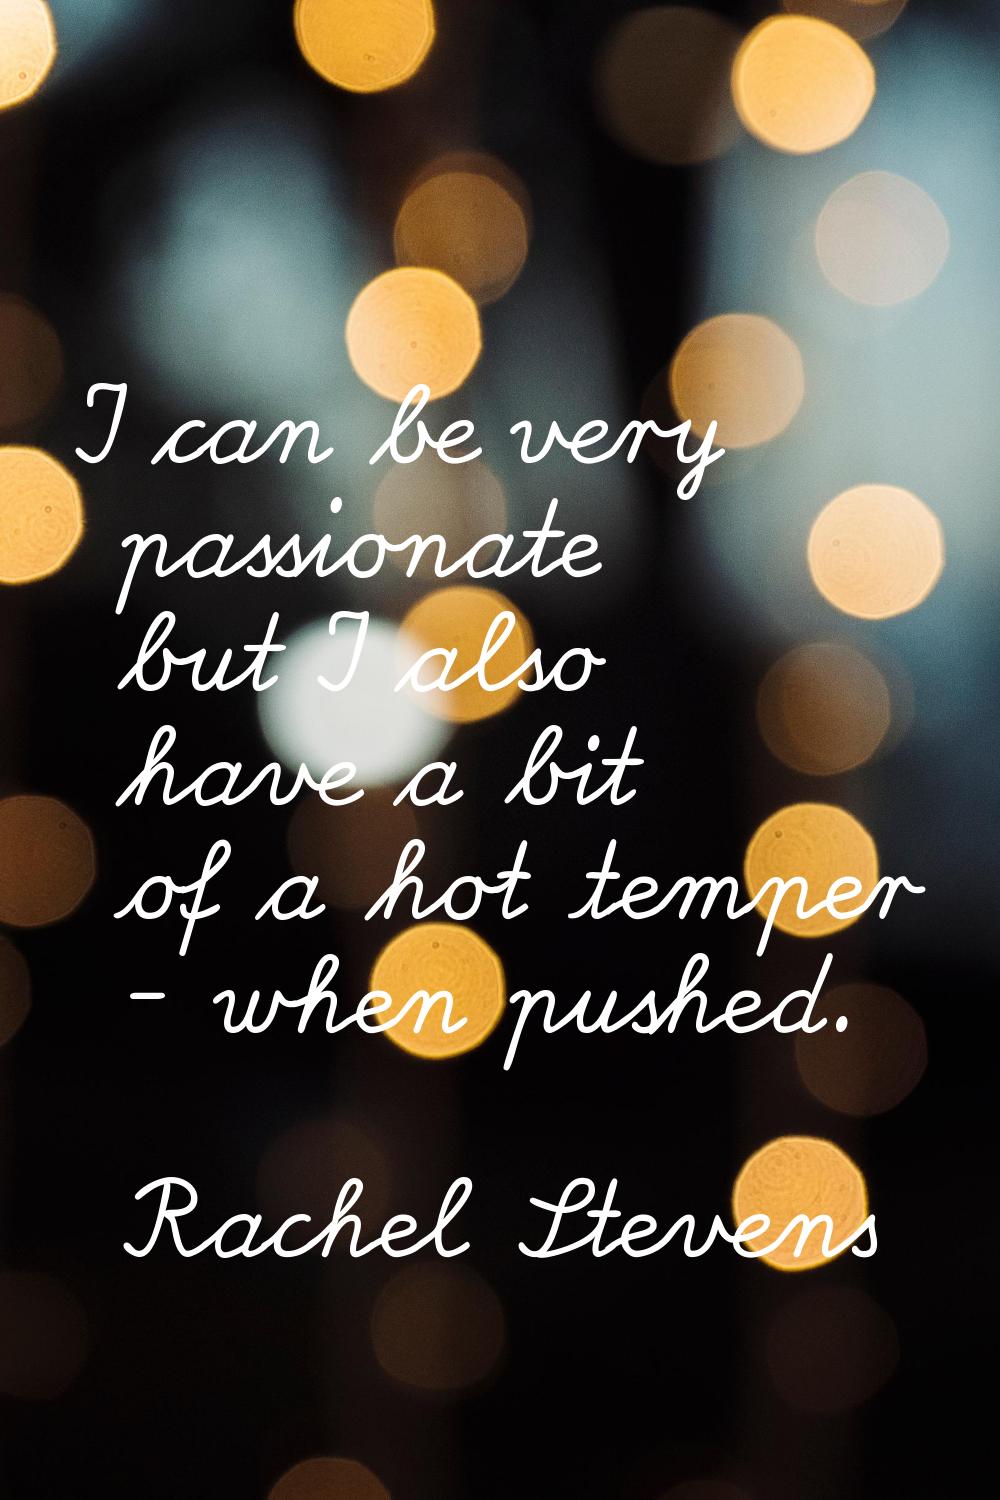 I can be very passionate but I also have a bit of a hot temper - when pushed.